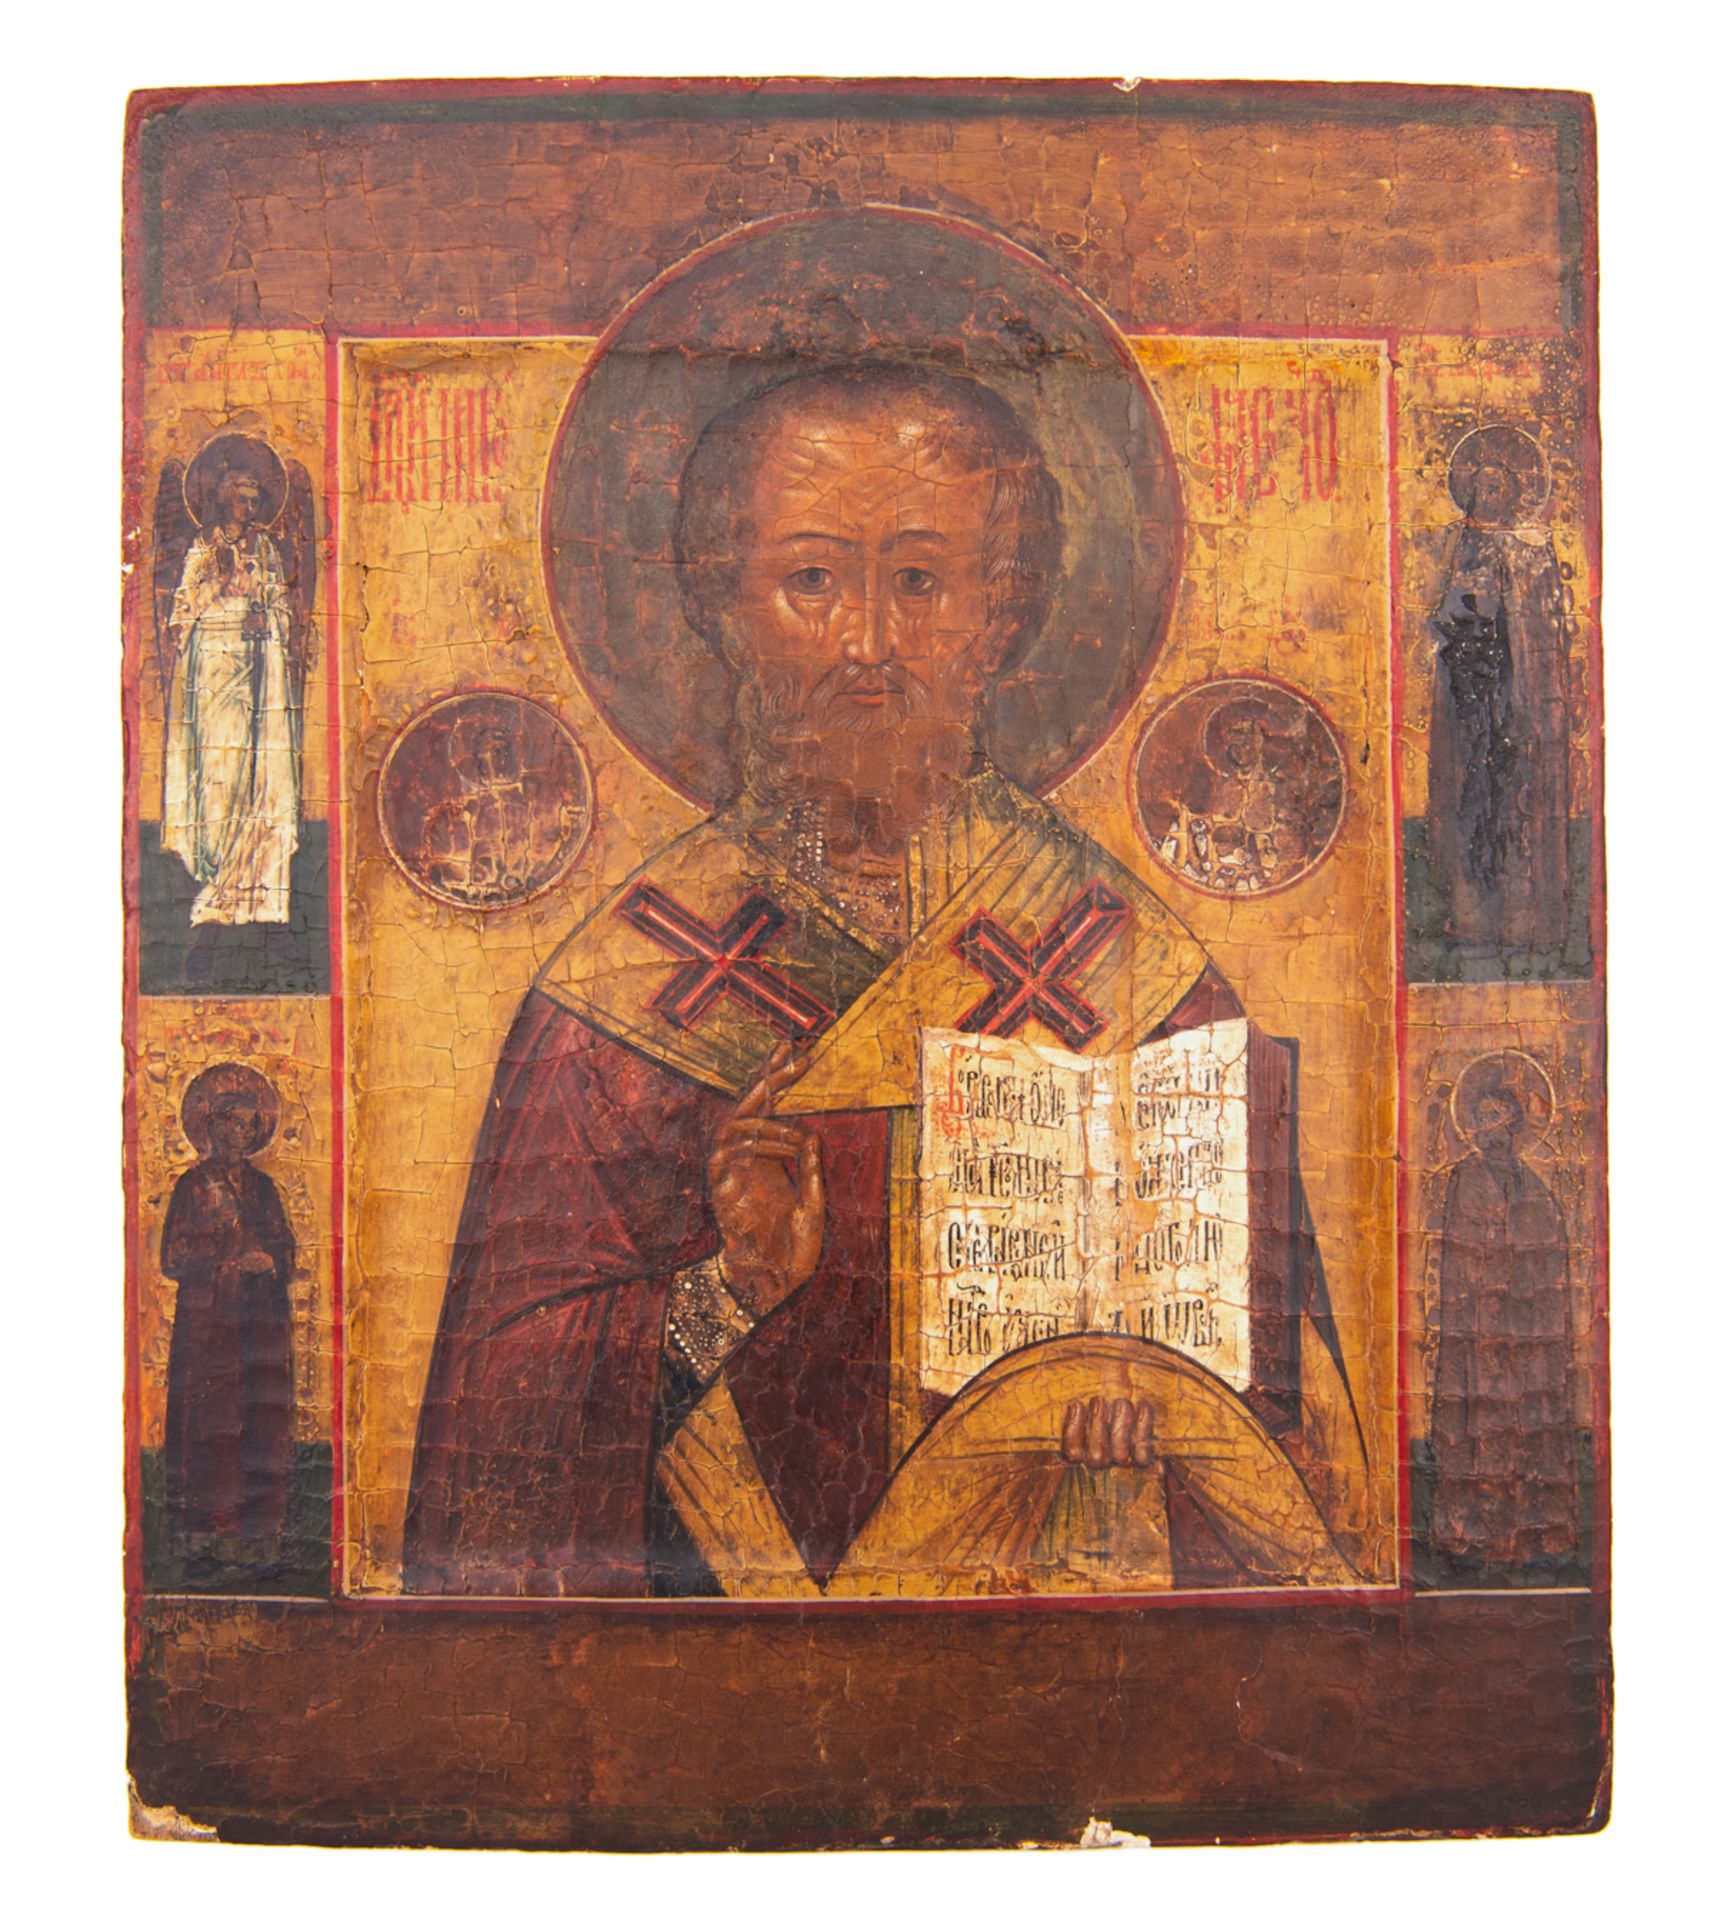 A Russian icon depicting Saint Nicholas of Myra surrounded by Christ, the Holy Mary and four patron